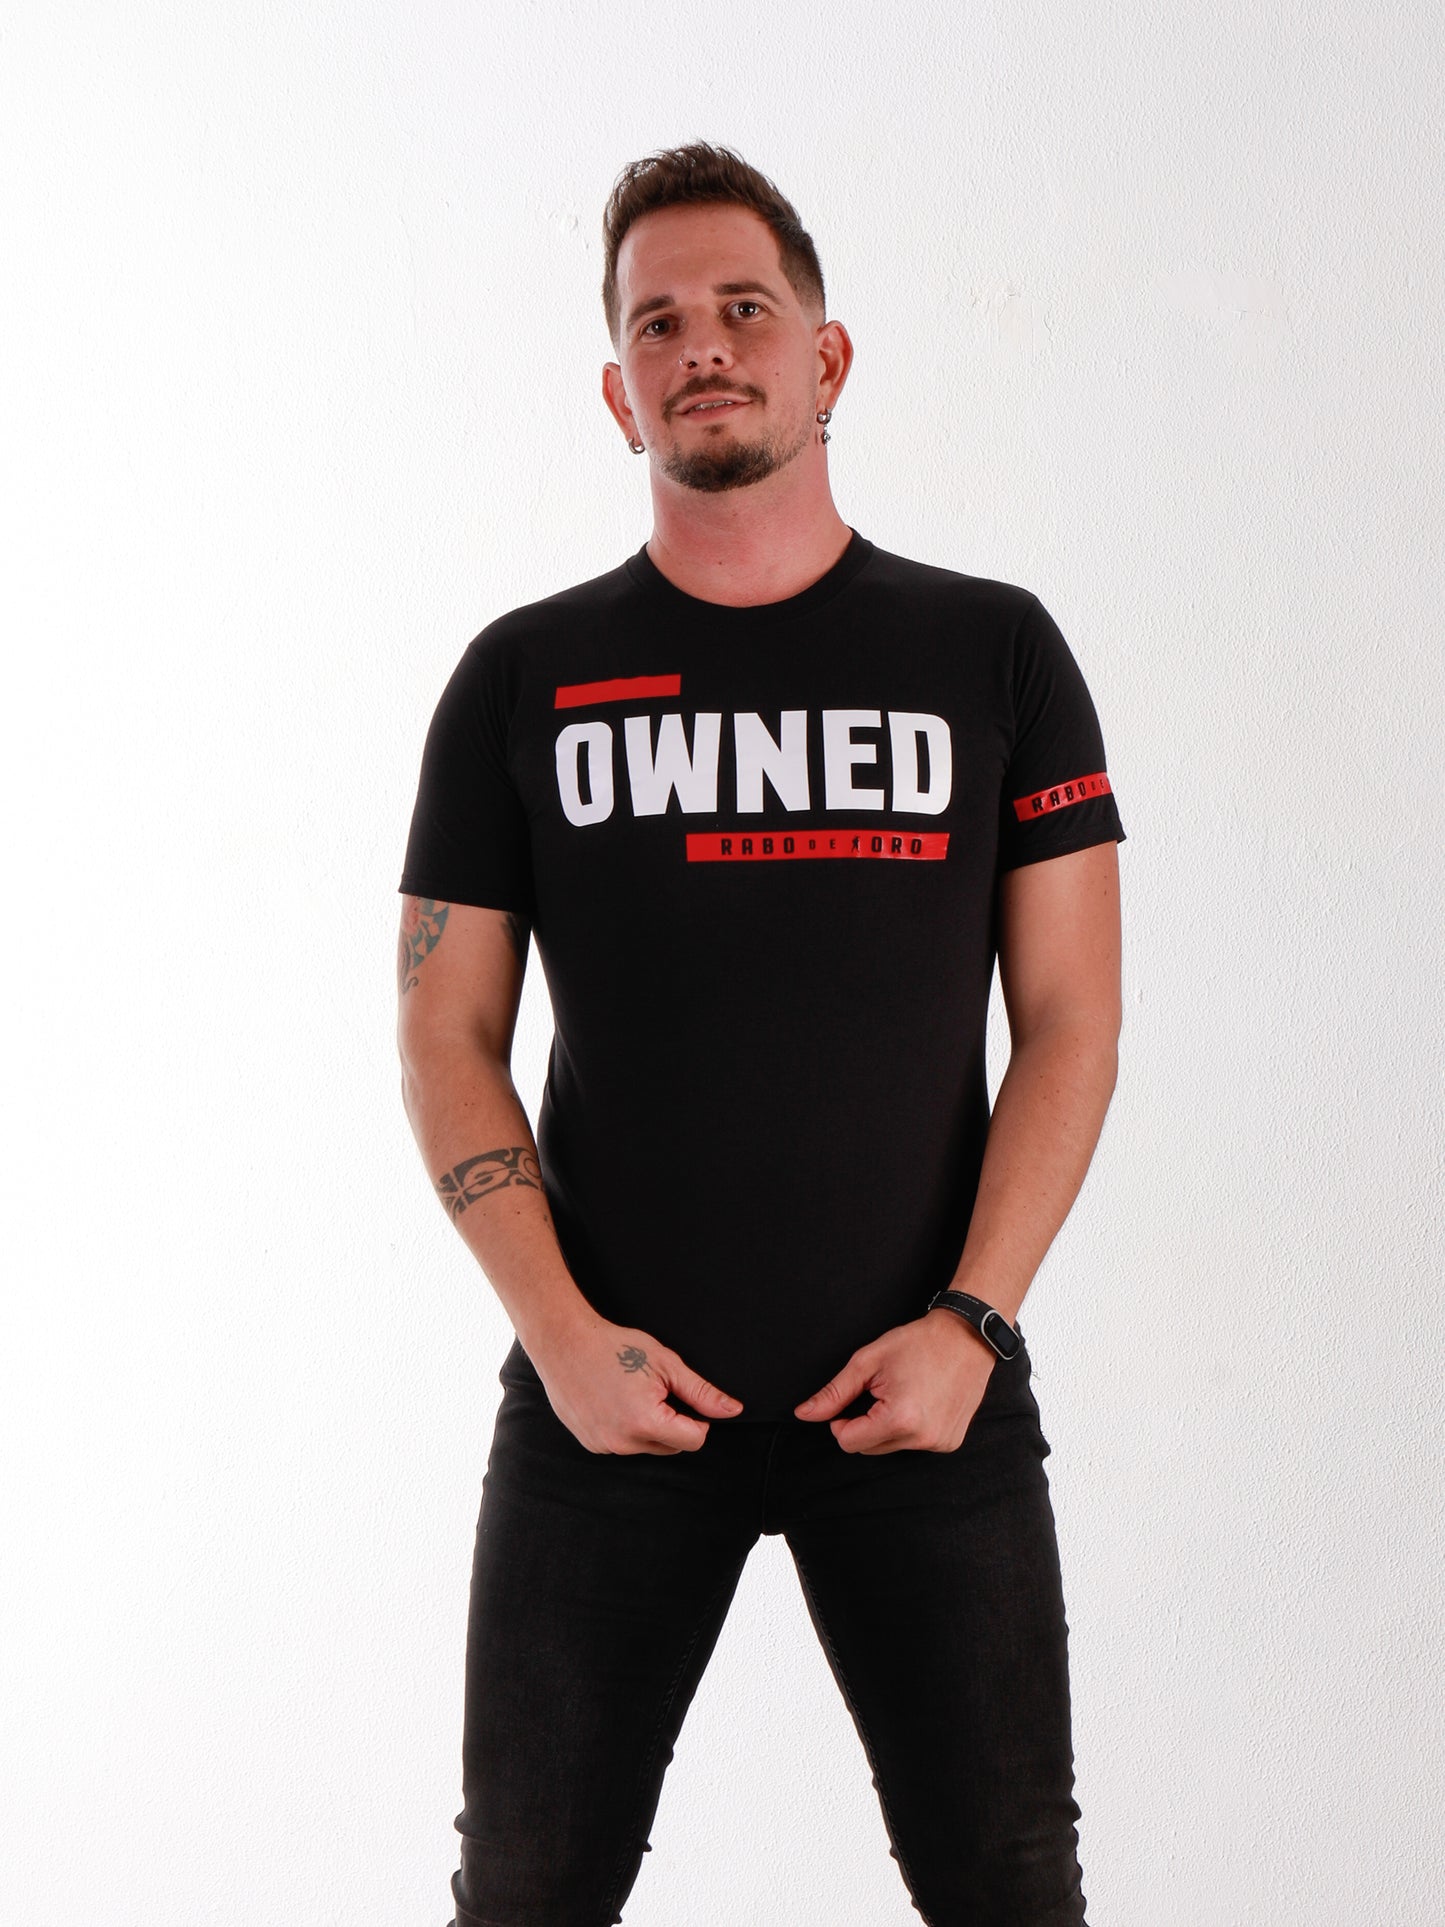 OWNED Black T-Shirt with BDSM Hanky Code details